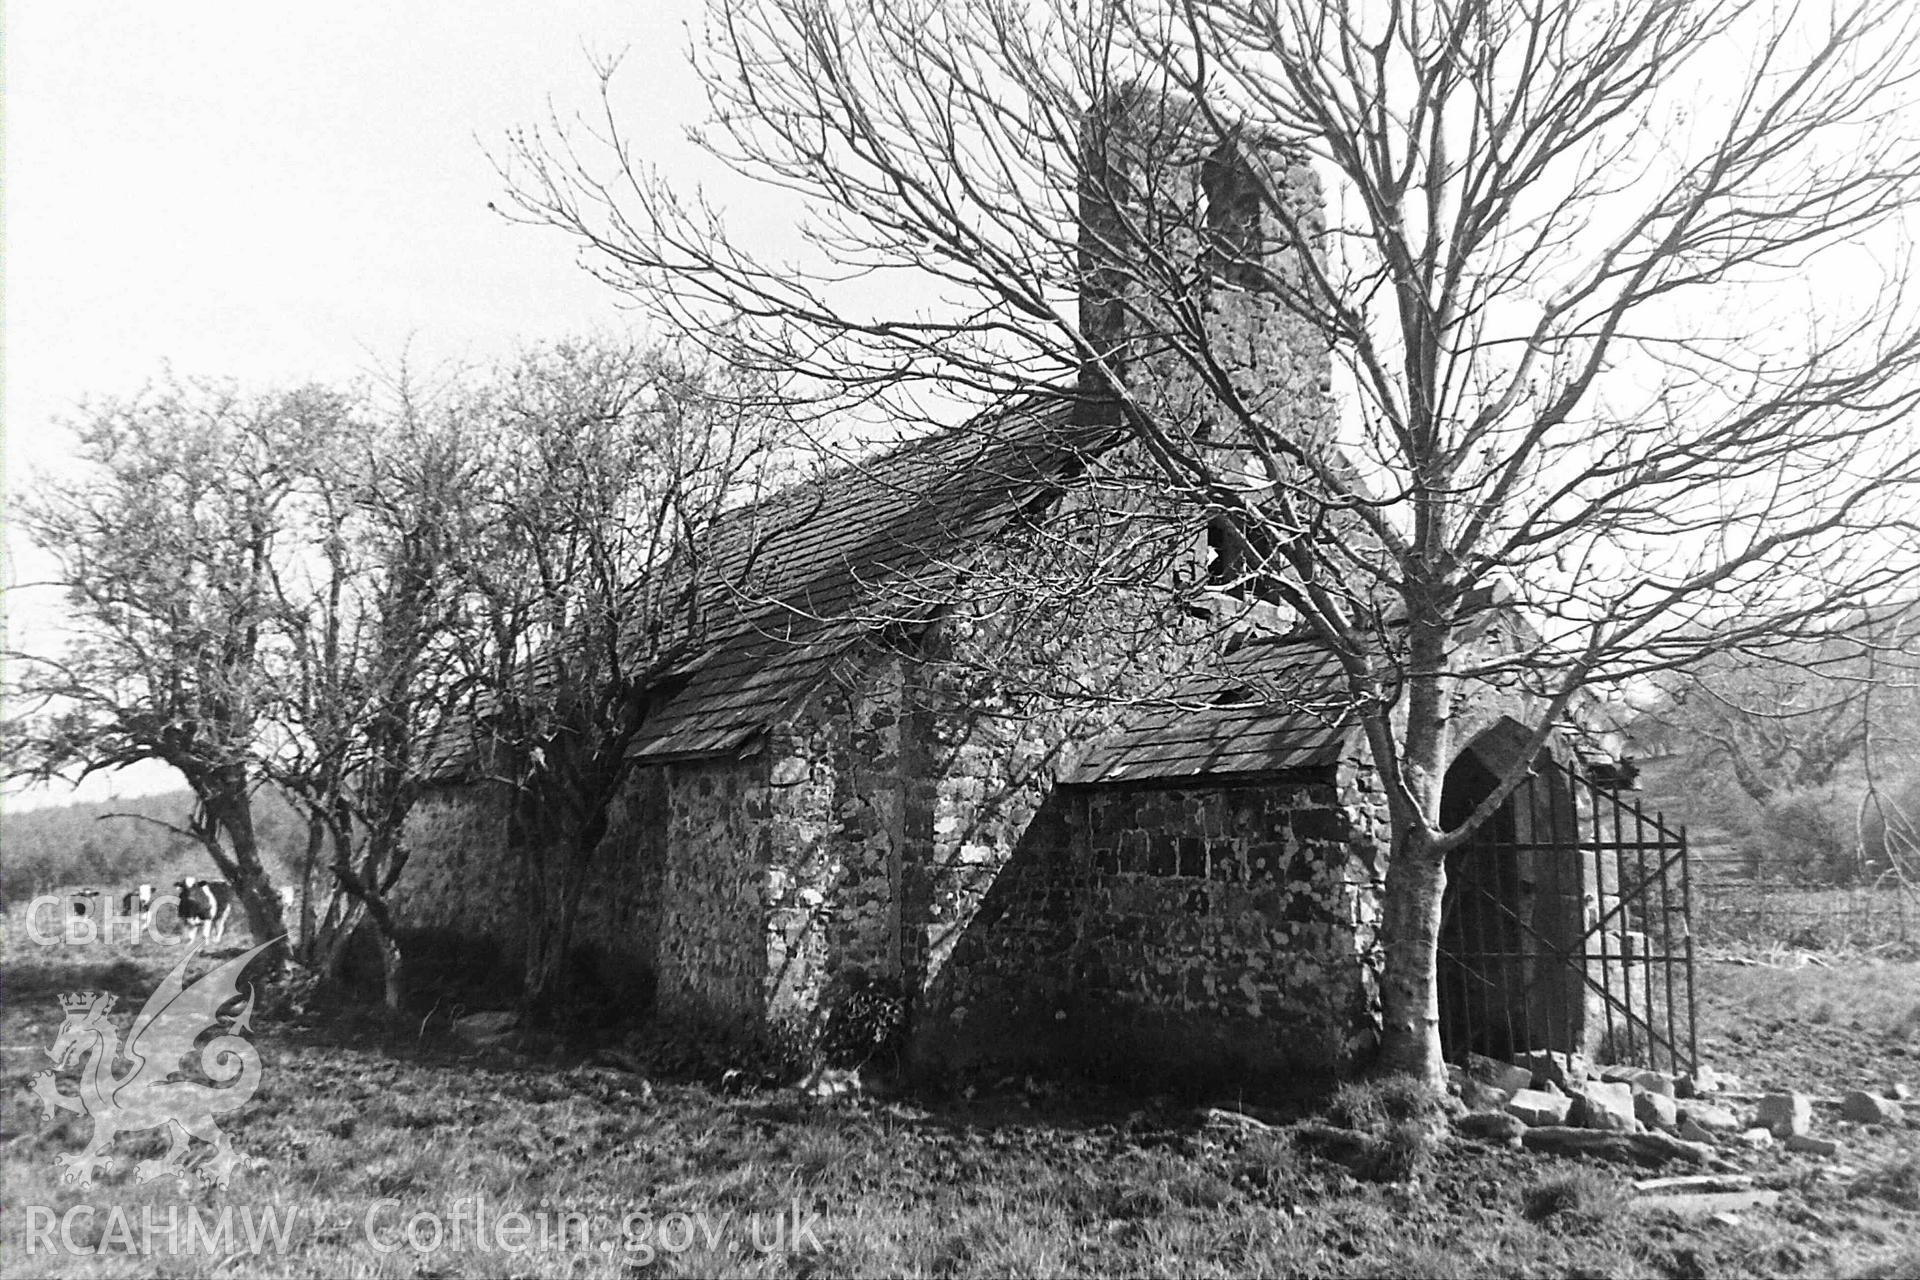 Digitised black and white photograph of Mounton Chapel, produced by Paul Davis in 1986